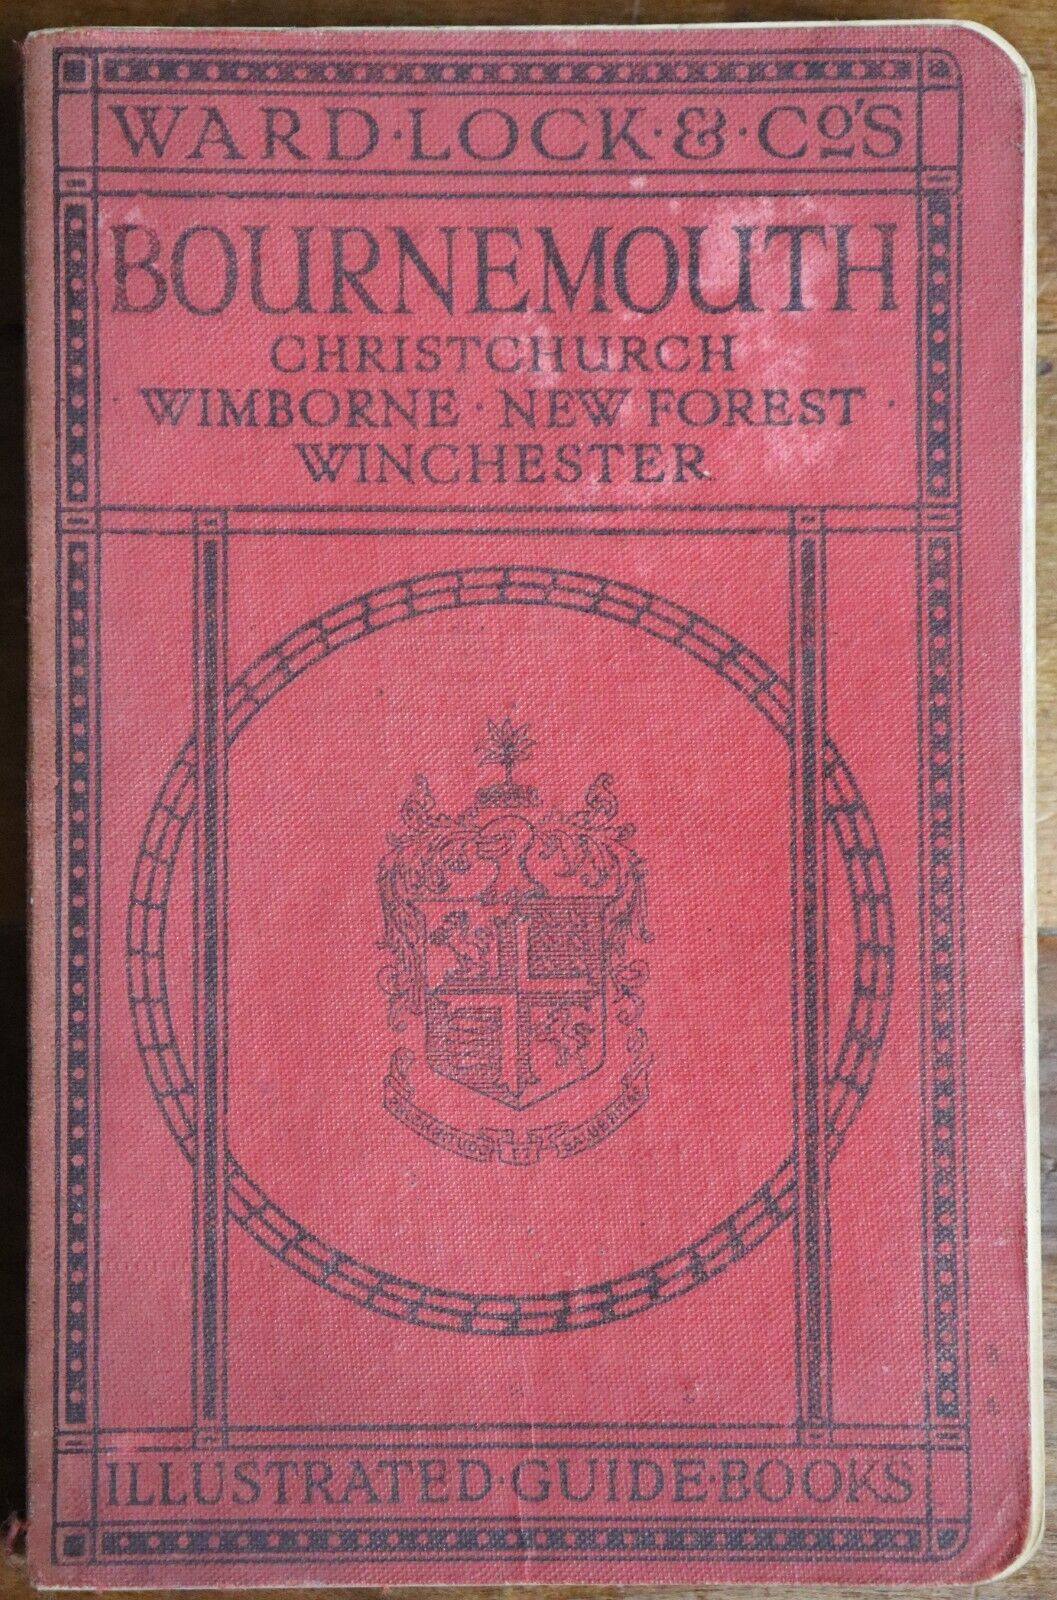 Guide To Bournemouth: Ward Lock & Co - 1927 - Antique Travel Guide Book w/Maps